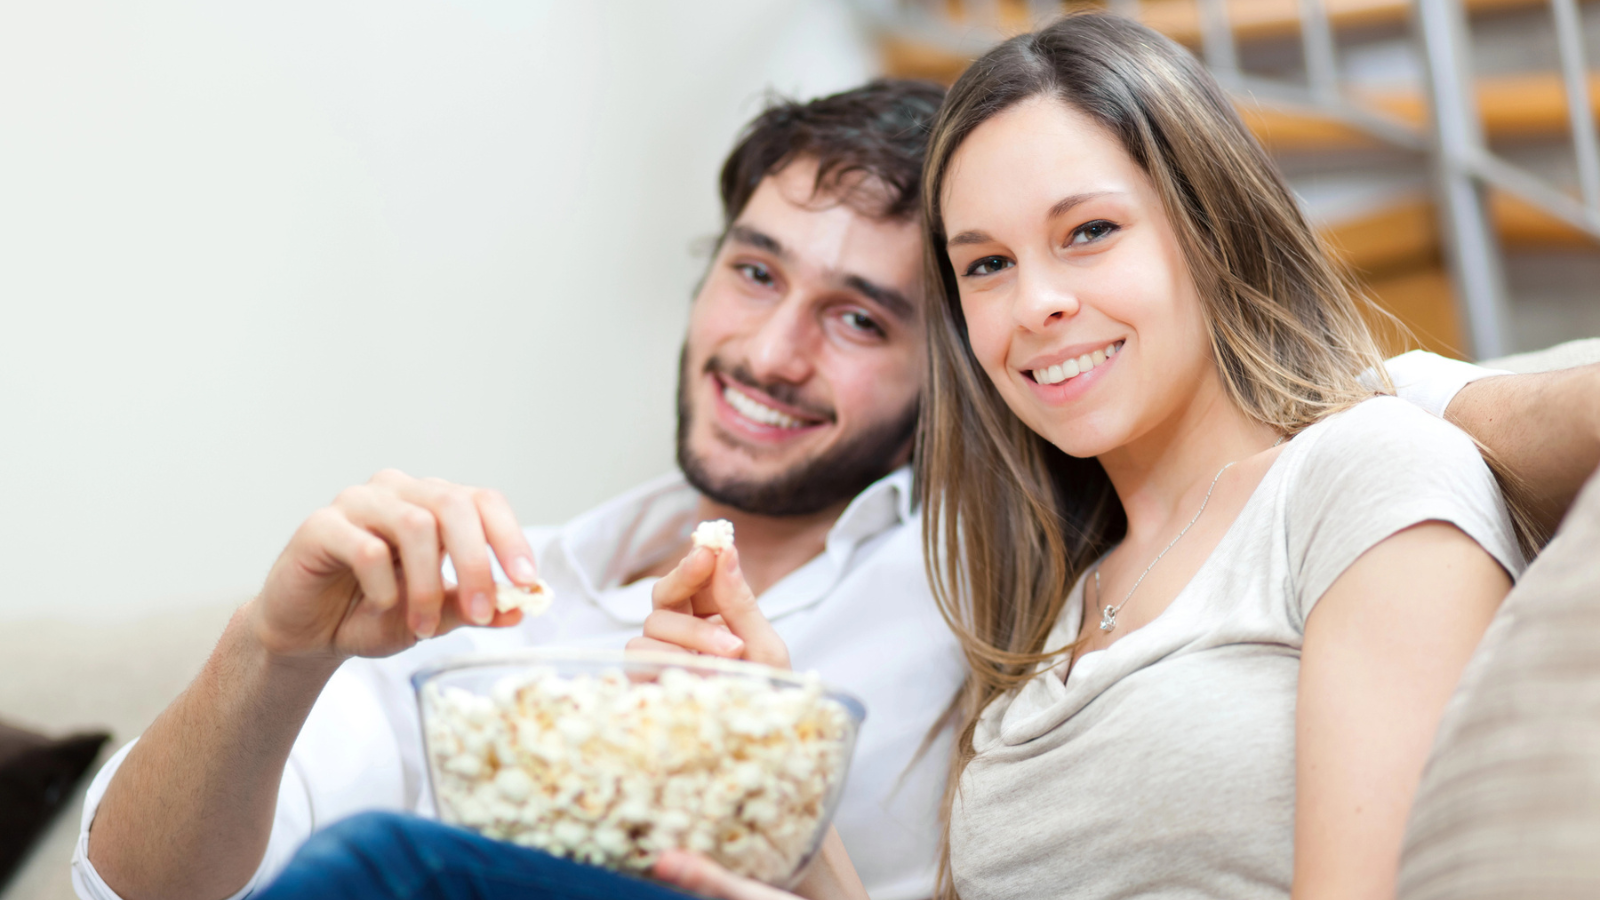 Couple Eating Popcorn While Watching a Movie